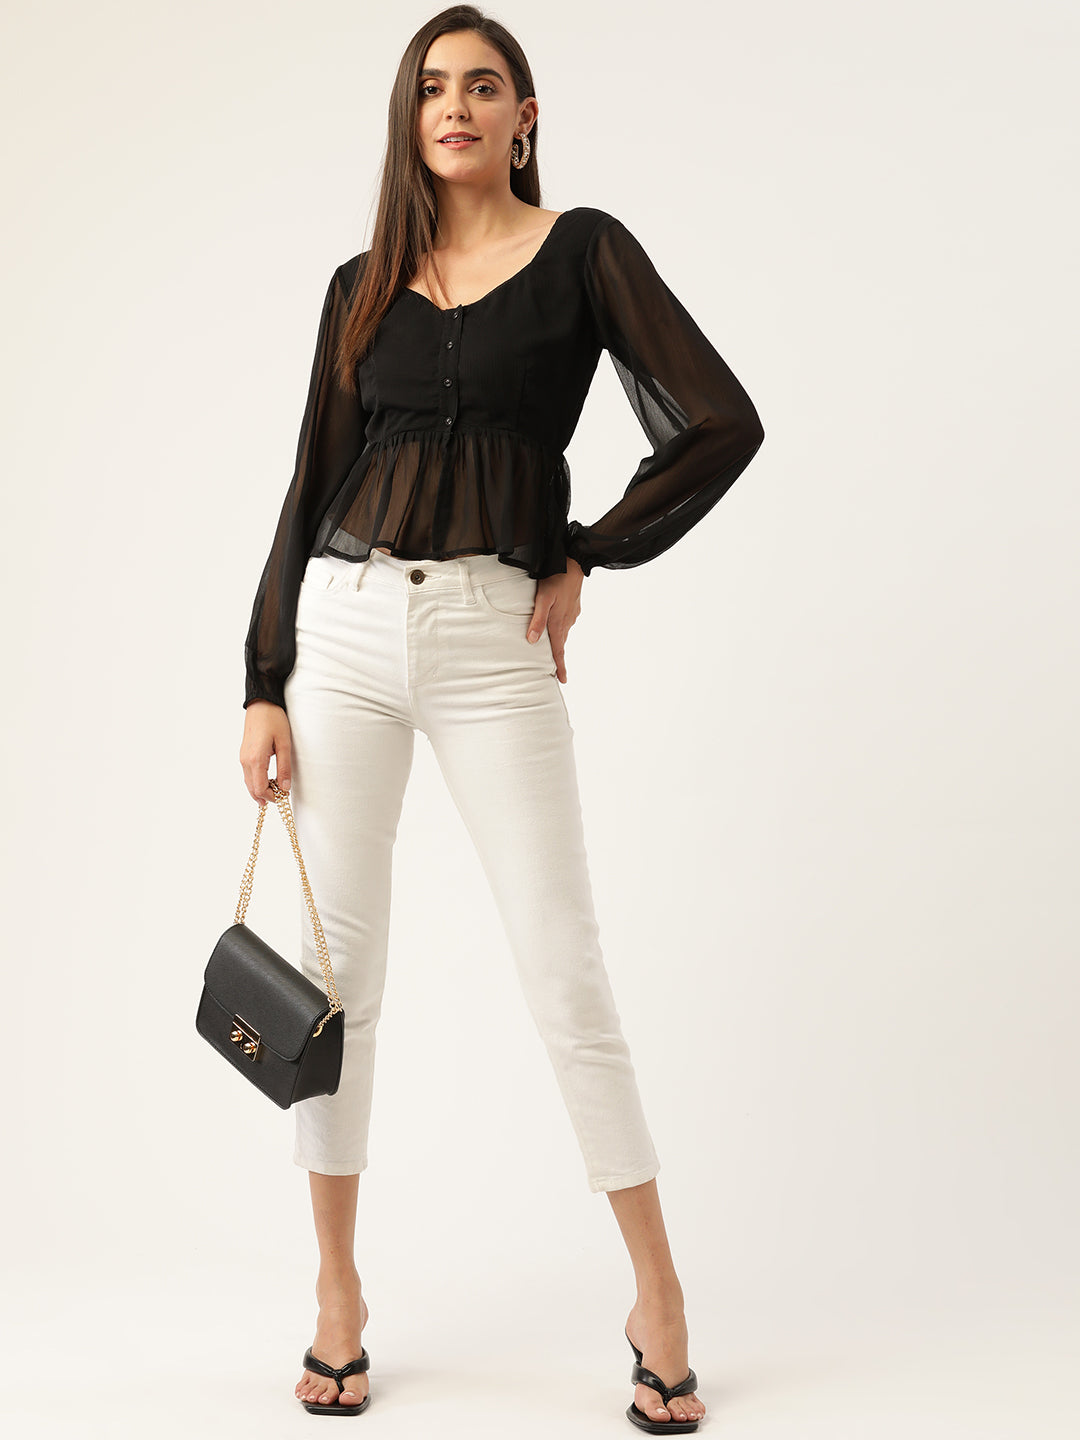 Buy Two Tops Black And Off-White